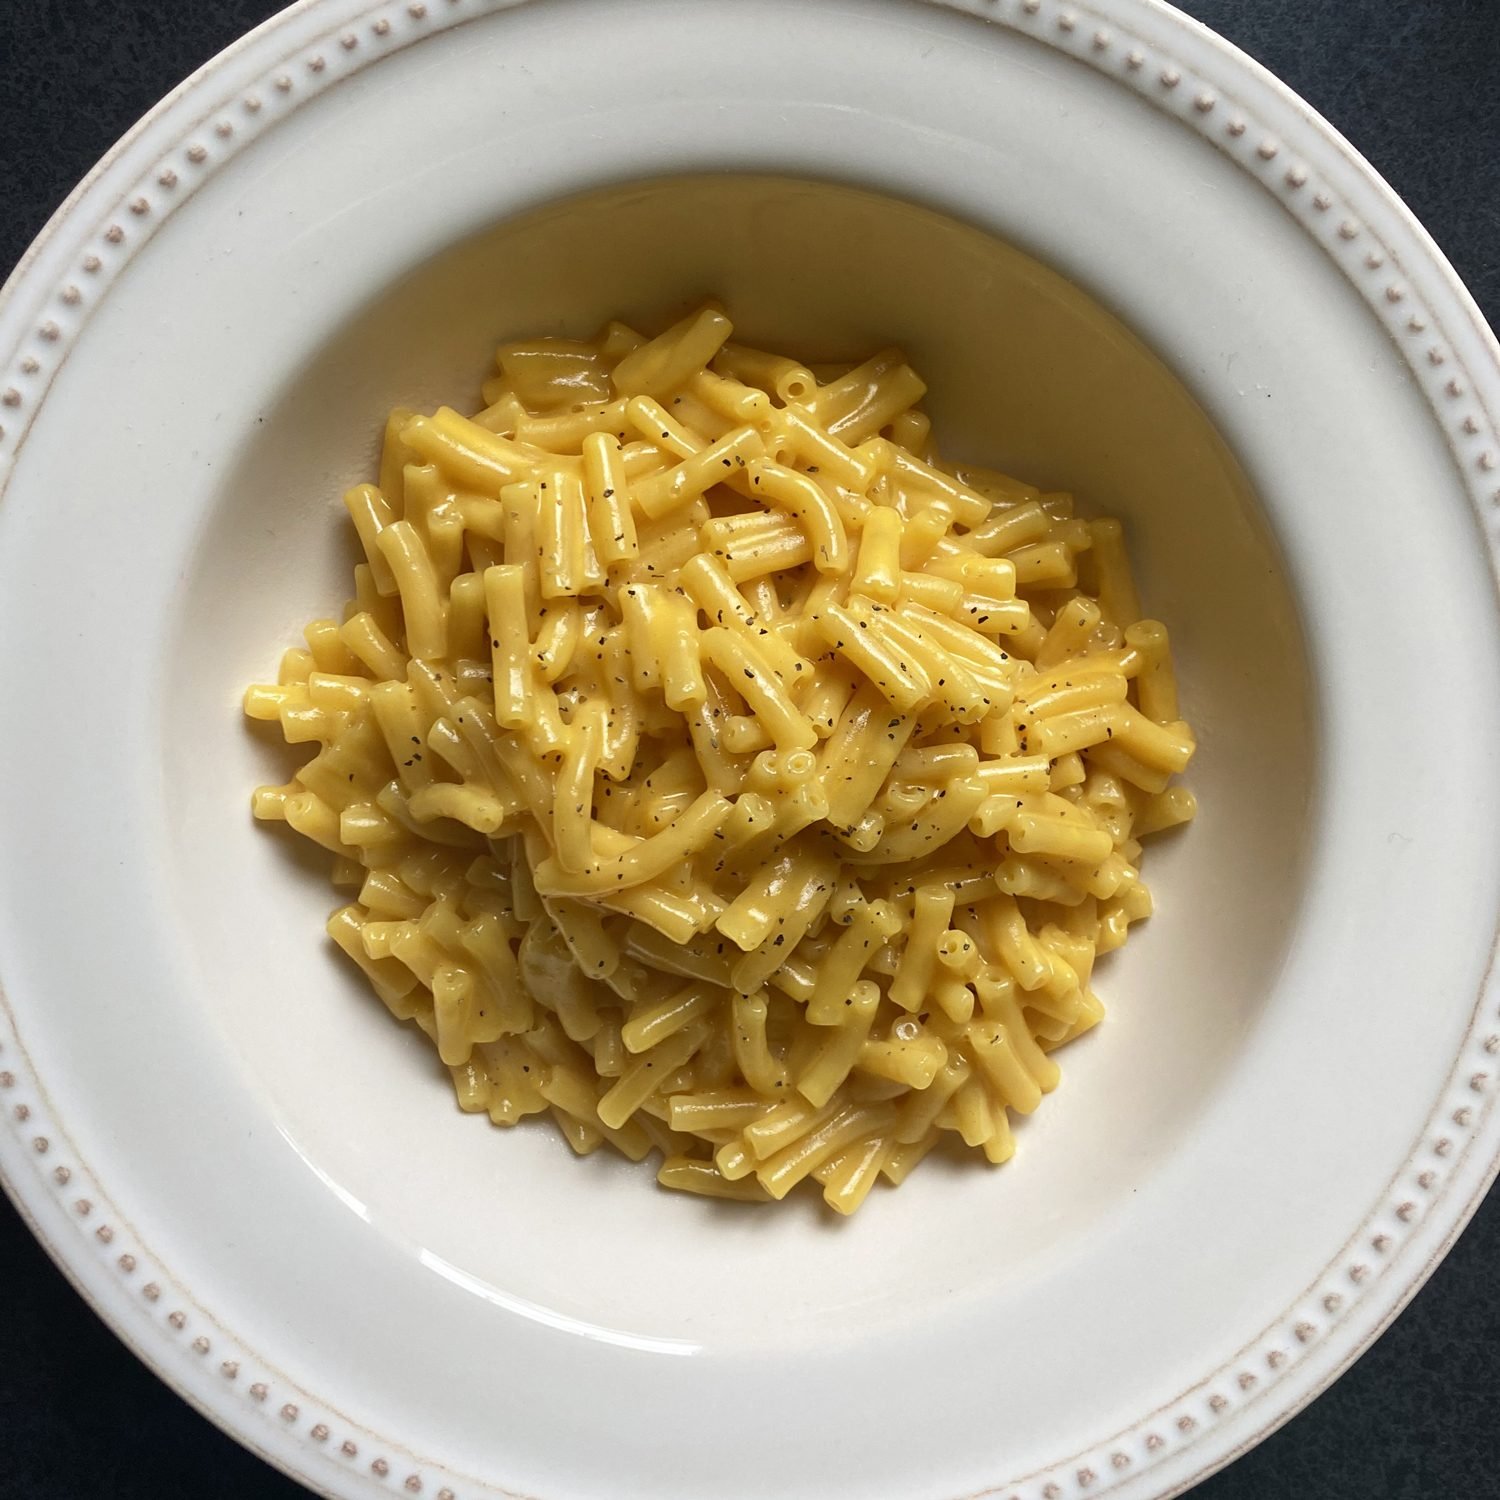 https://www.tasteofhome.com/wp-content/uploads/2021/09/tik-tok-mac-and-cheese01_Hannah-Twietmeyer-for-Taste-of-Home.jpg?fit=680%2C680